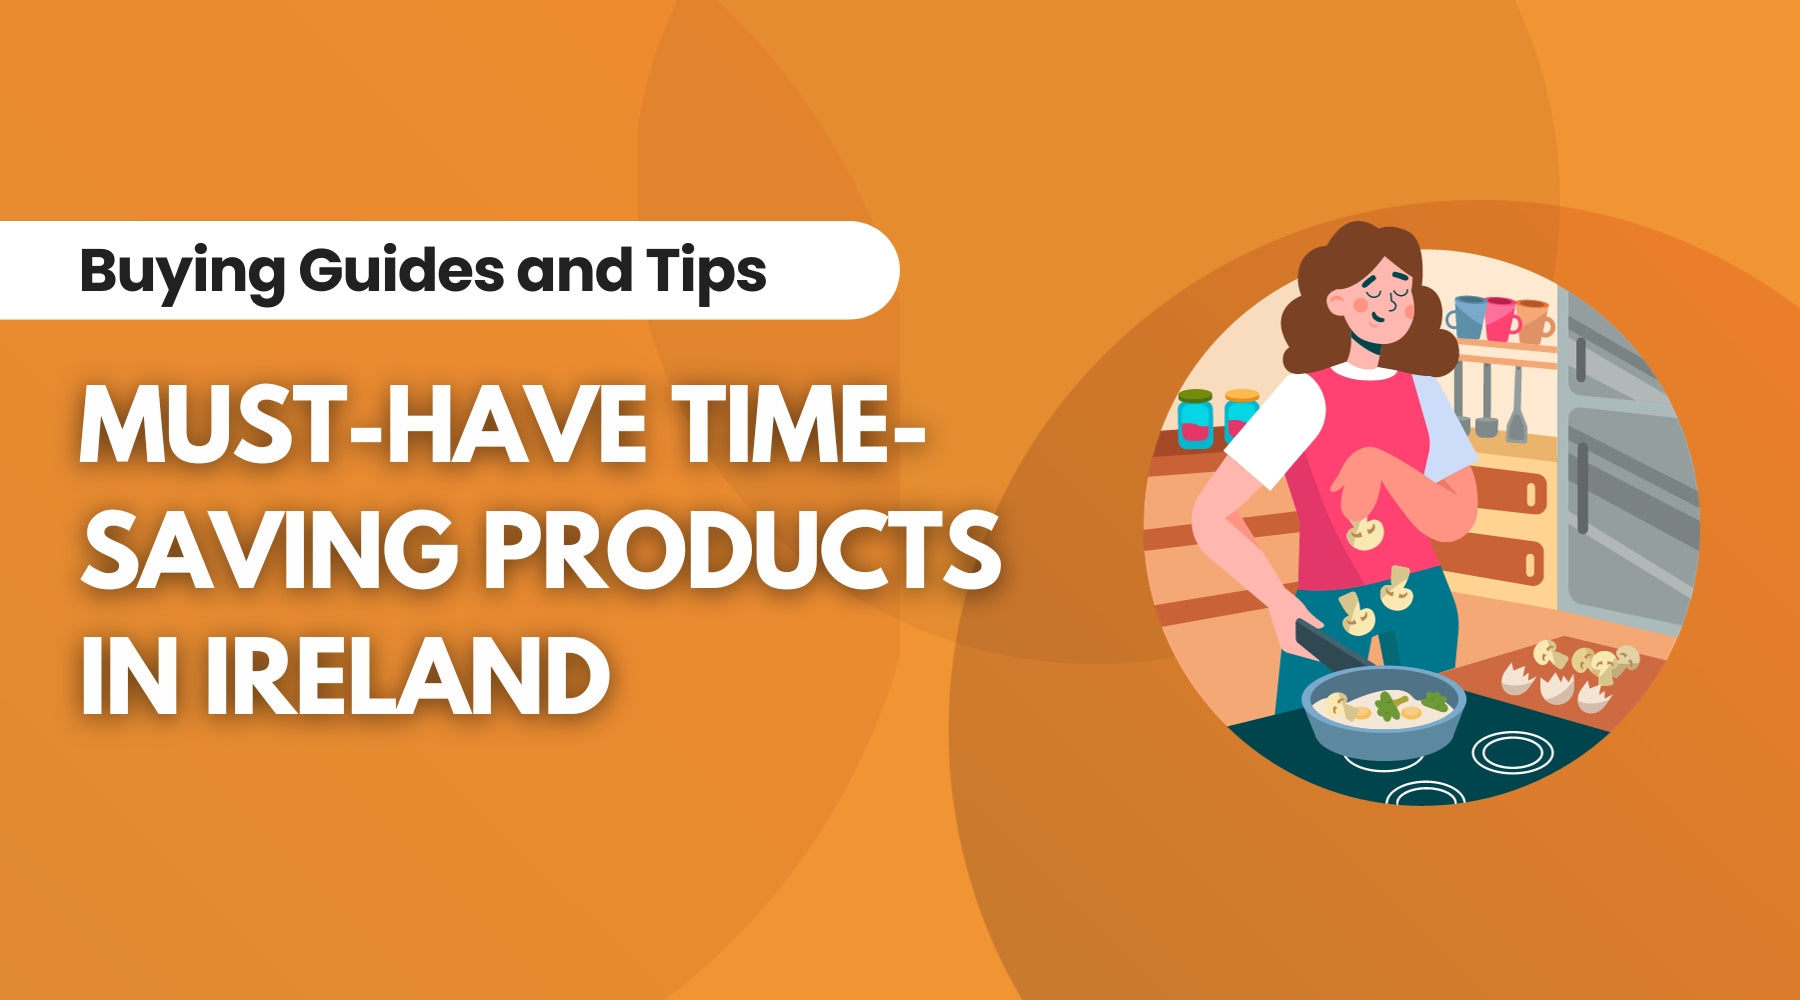 Top Kitchen Time-Saving Products in Ireland